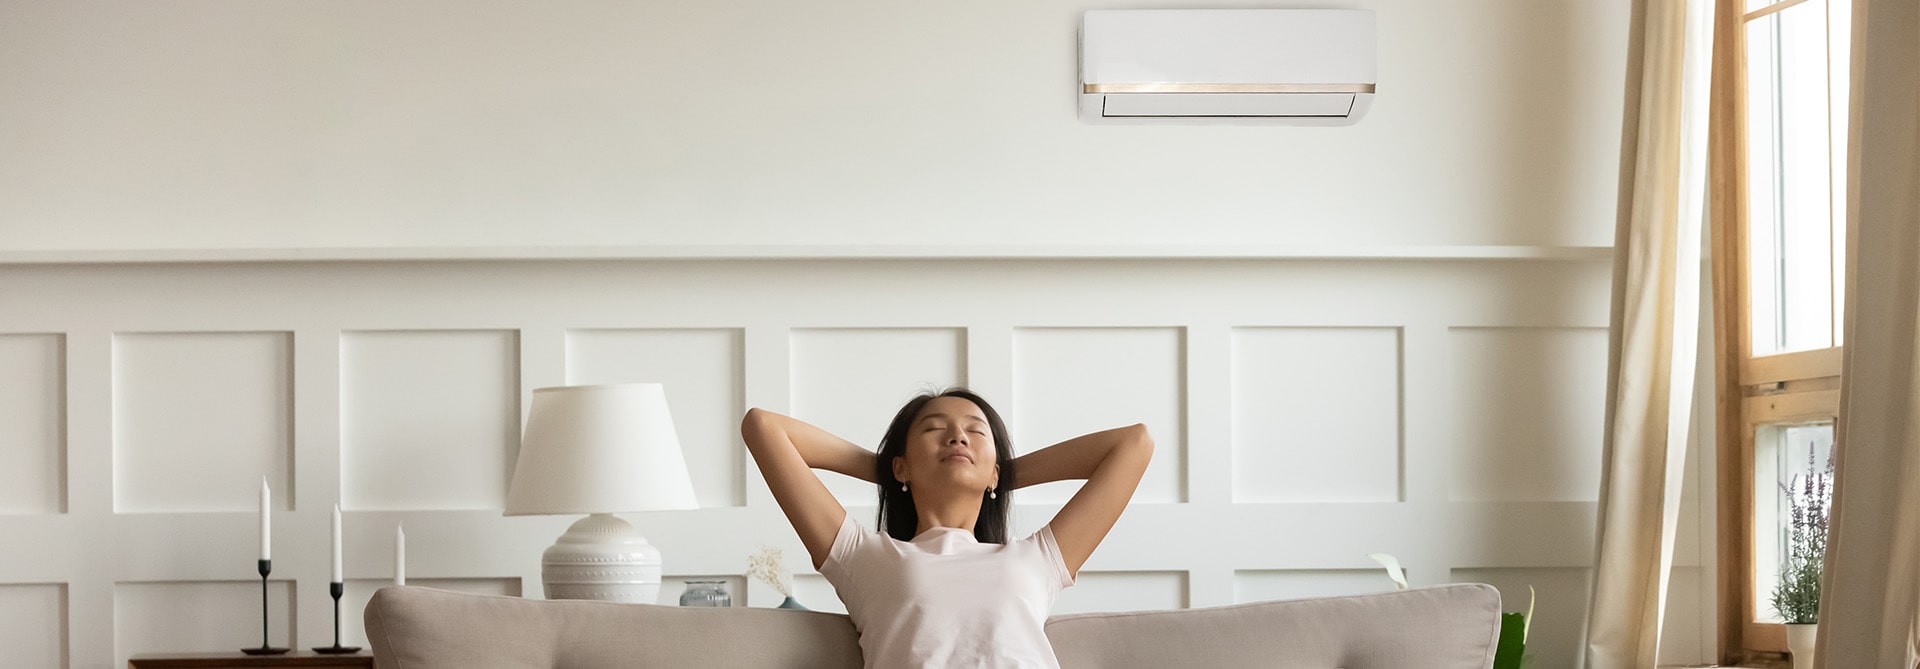 4 Common Aircon Problems You Should Be Aware Of